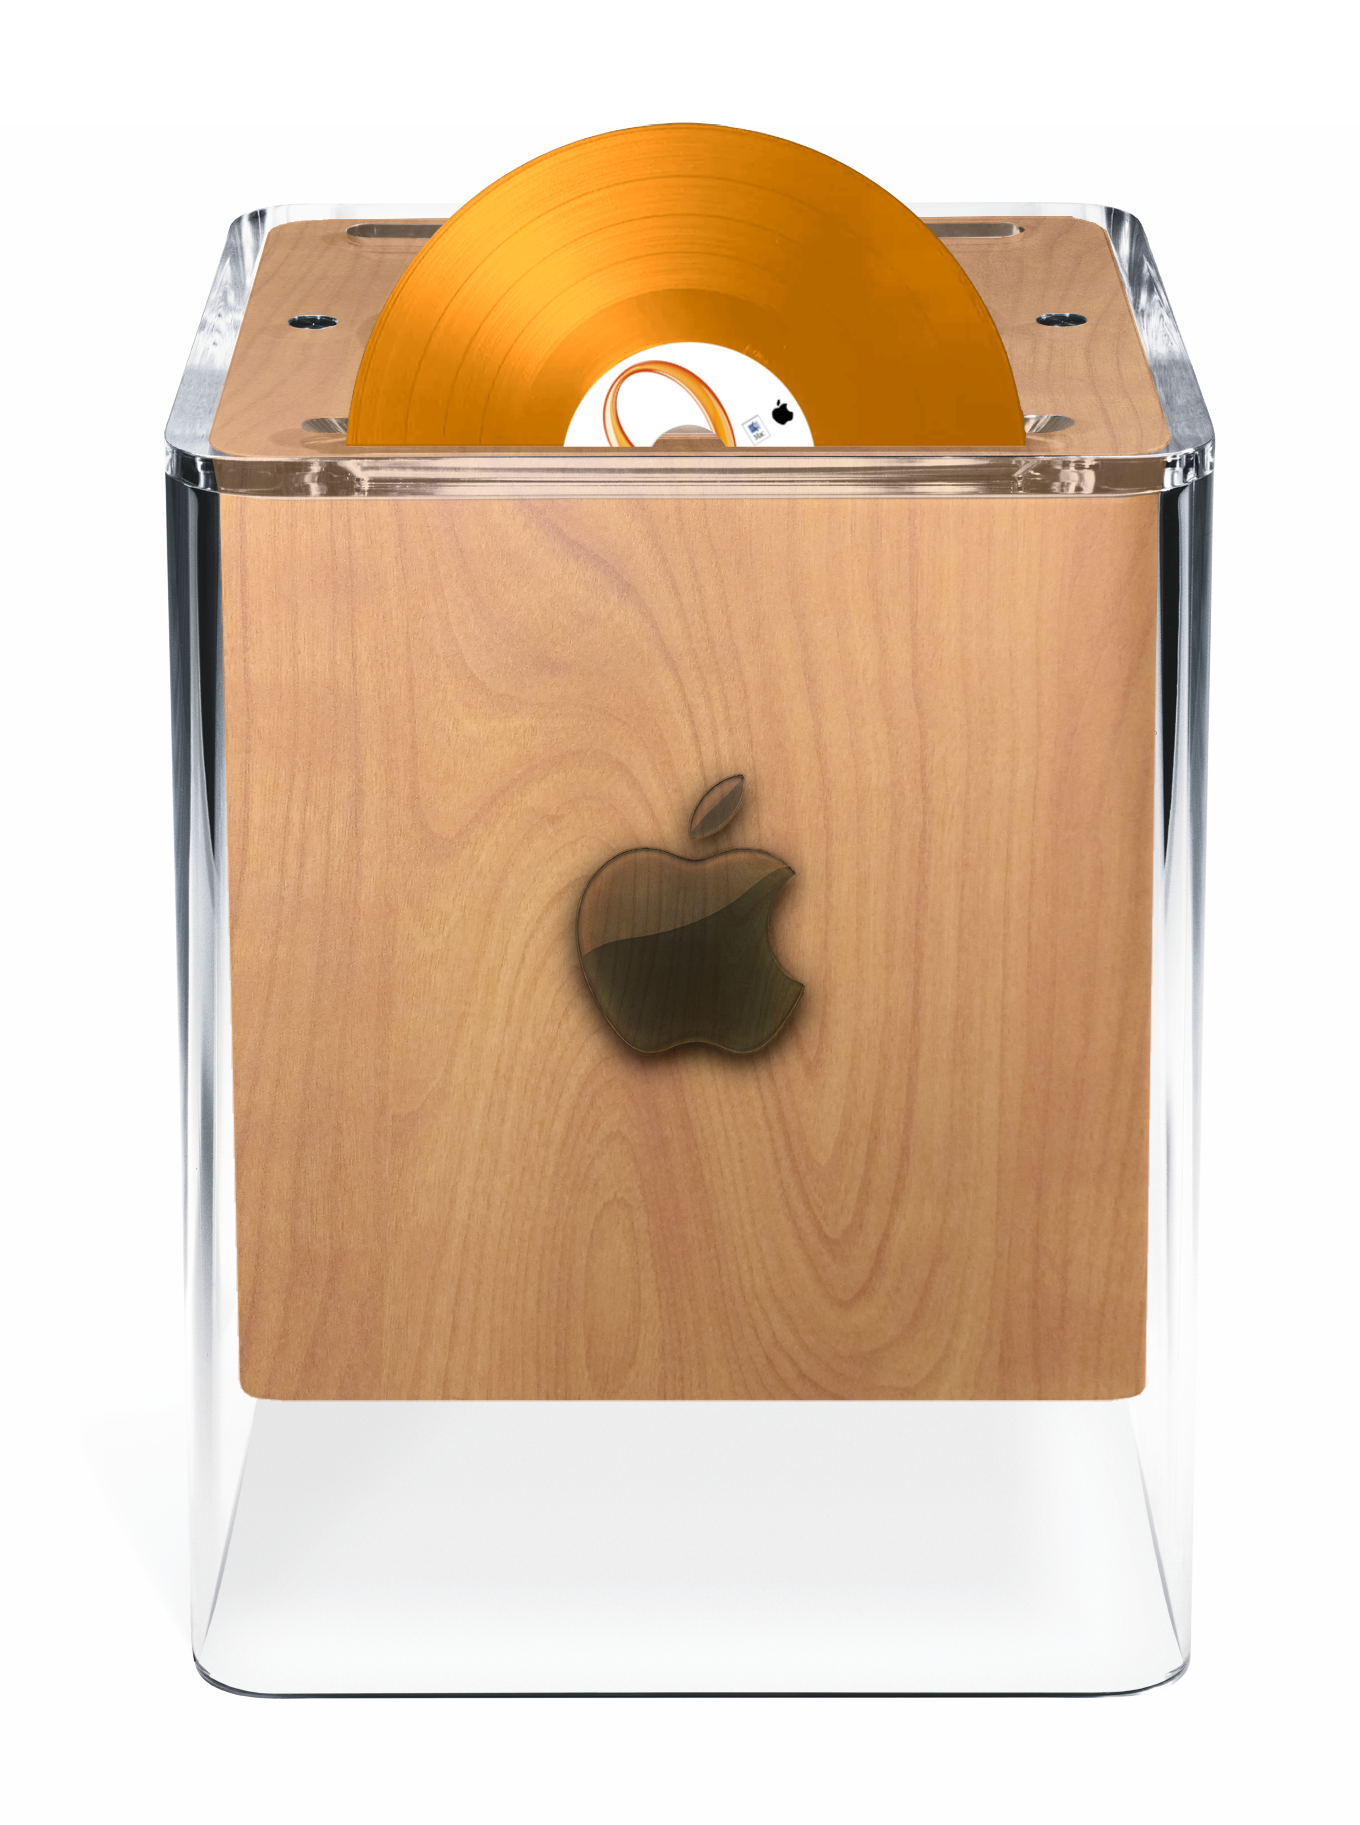 Installing Mac OS 9 from the original orange 45 on a wood panel Power Mac G4 Cube.